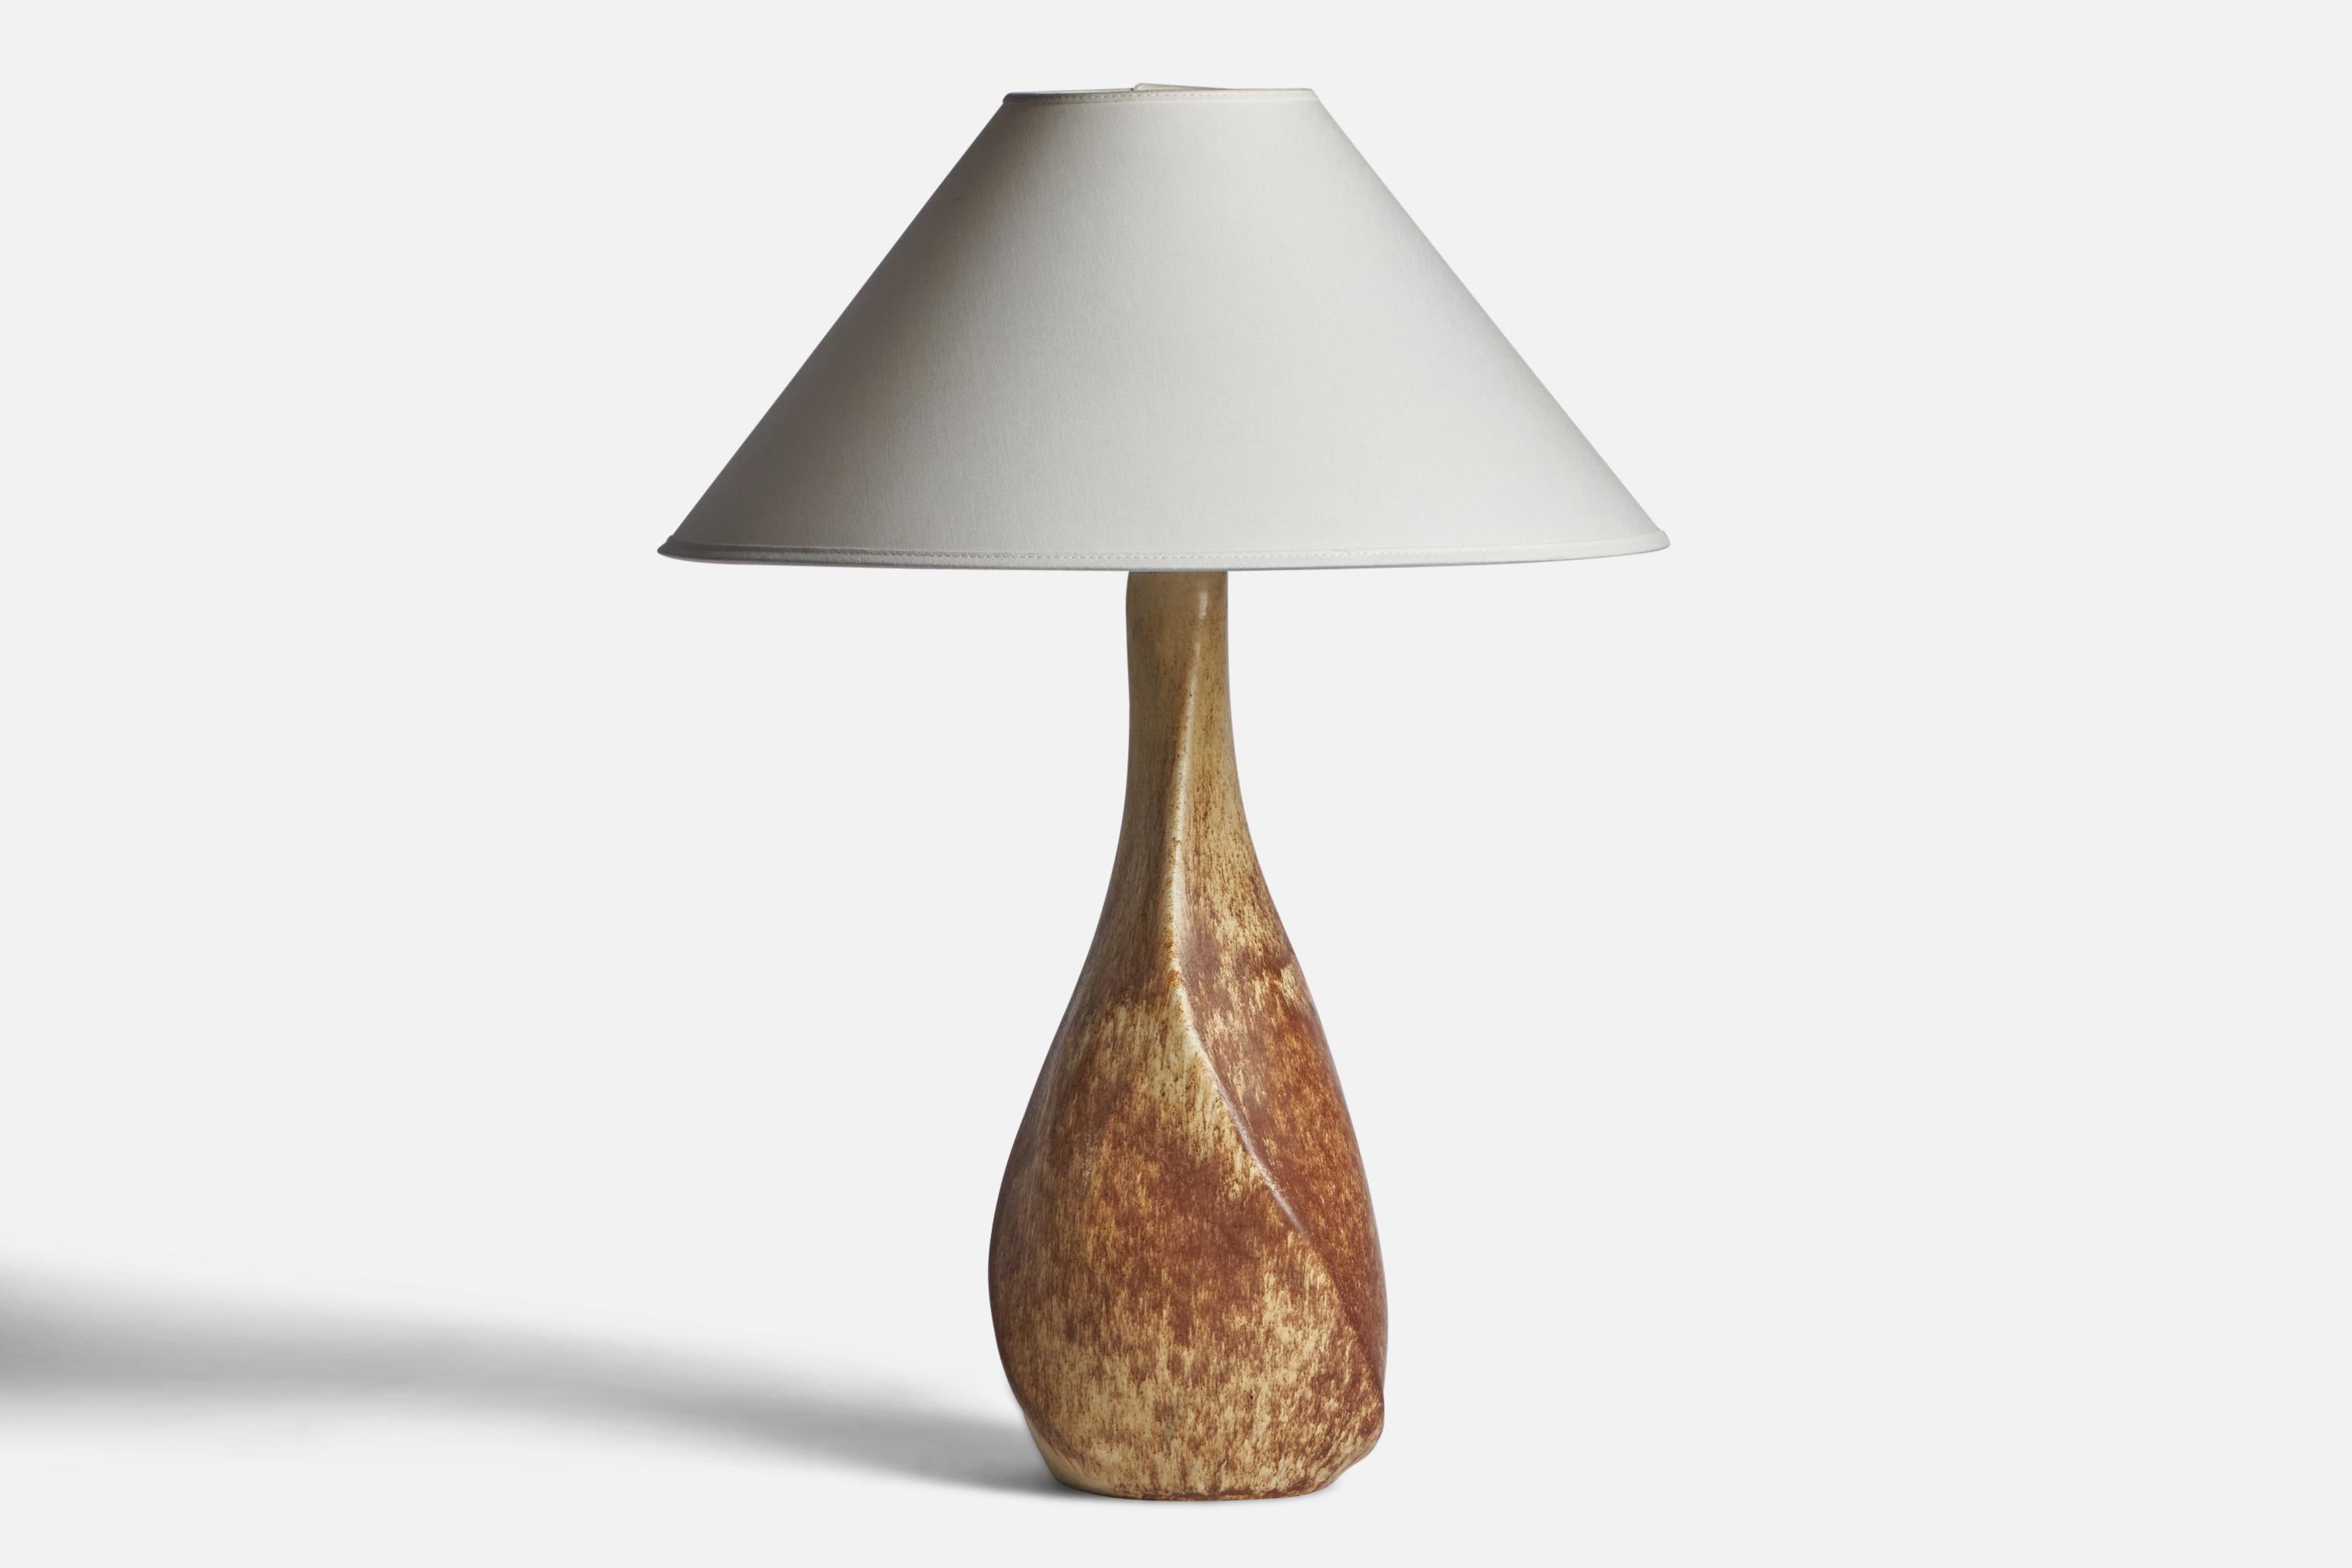 A brown-glazed stoneware table lamp designed and produced by Preben Brandt Larsen, Denmark, 1960s. 

Dimensions of Lamp (inches): 17.85” H x 6.3” Diameter
Dimensions of Shade (inches): 4.5” Top Diameter x 16” Bottom Diameter x 7.25” H
Dimensions of